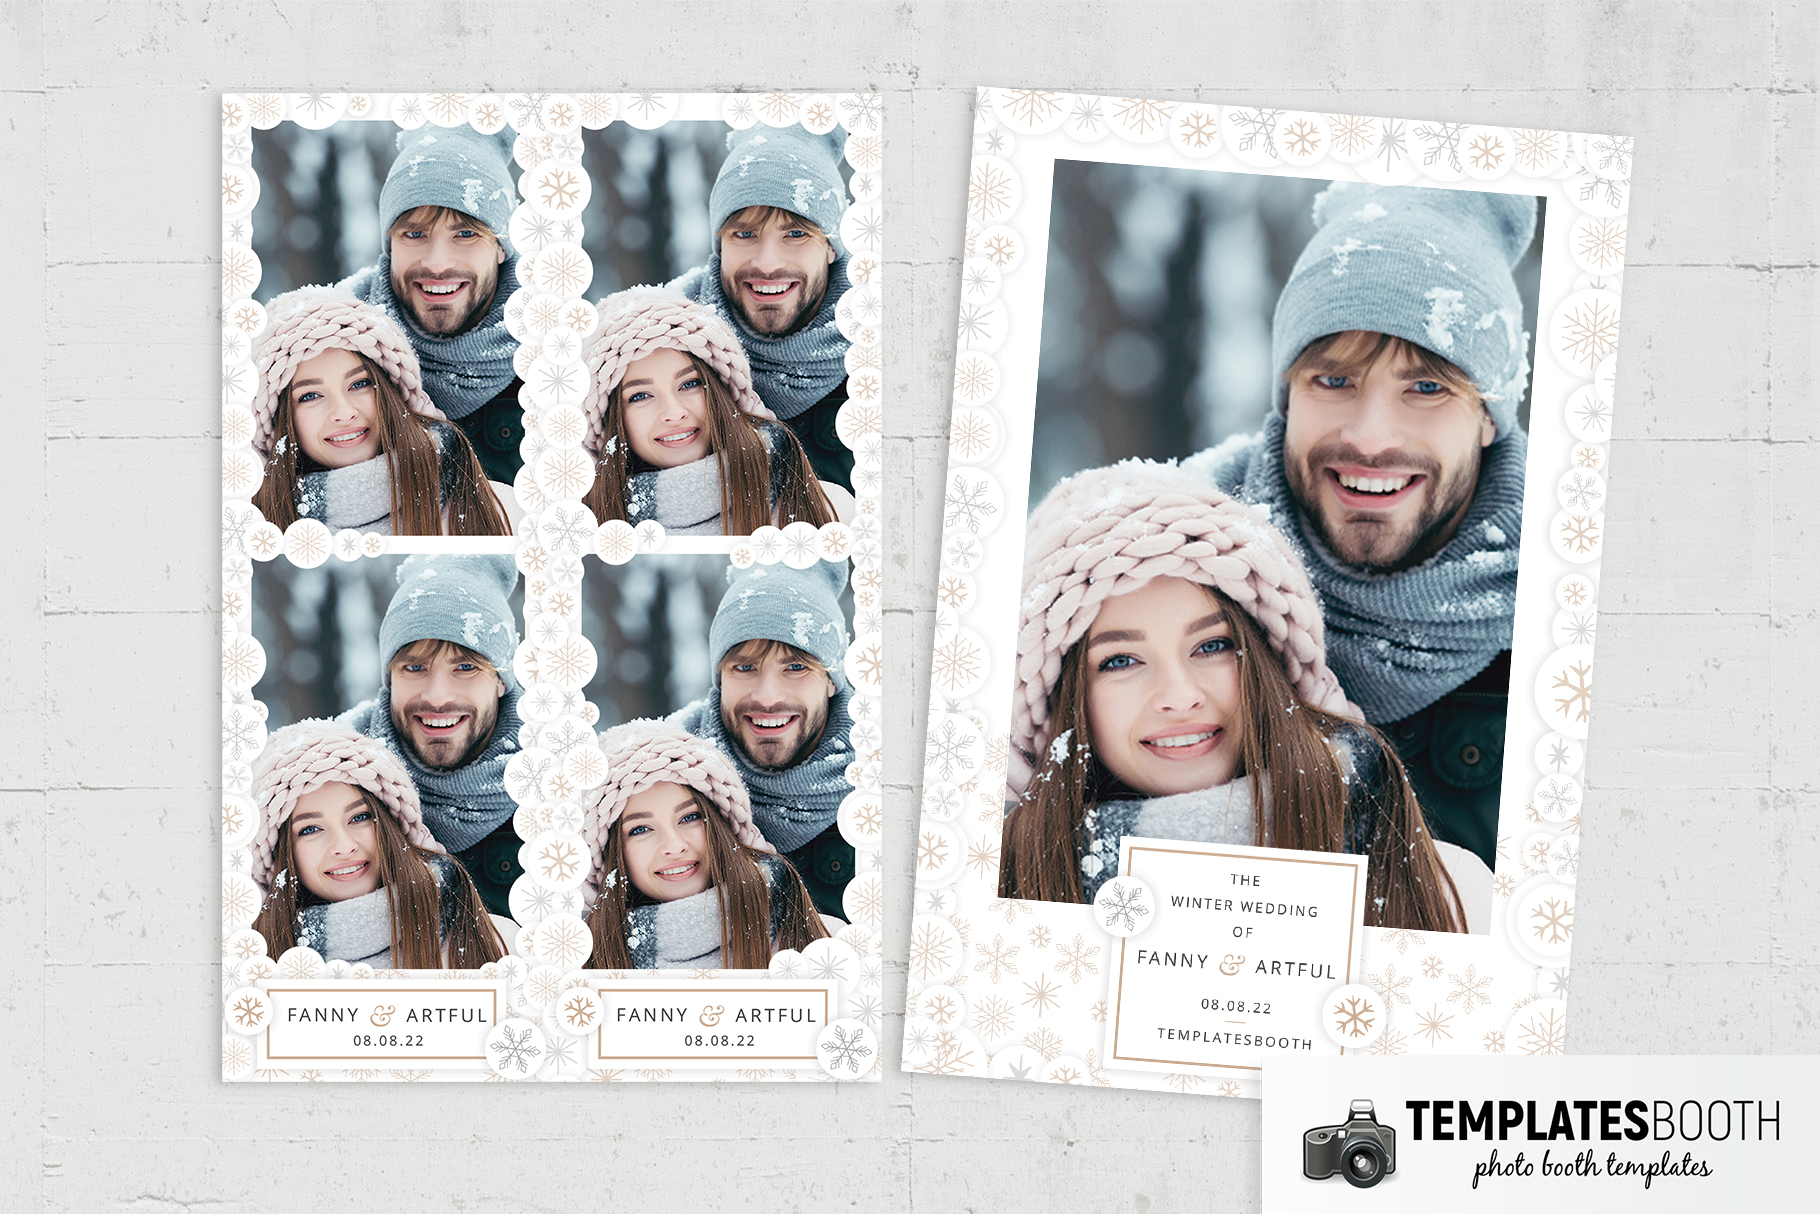 Contemporary Winter Photo Booth Template